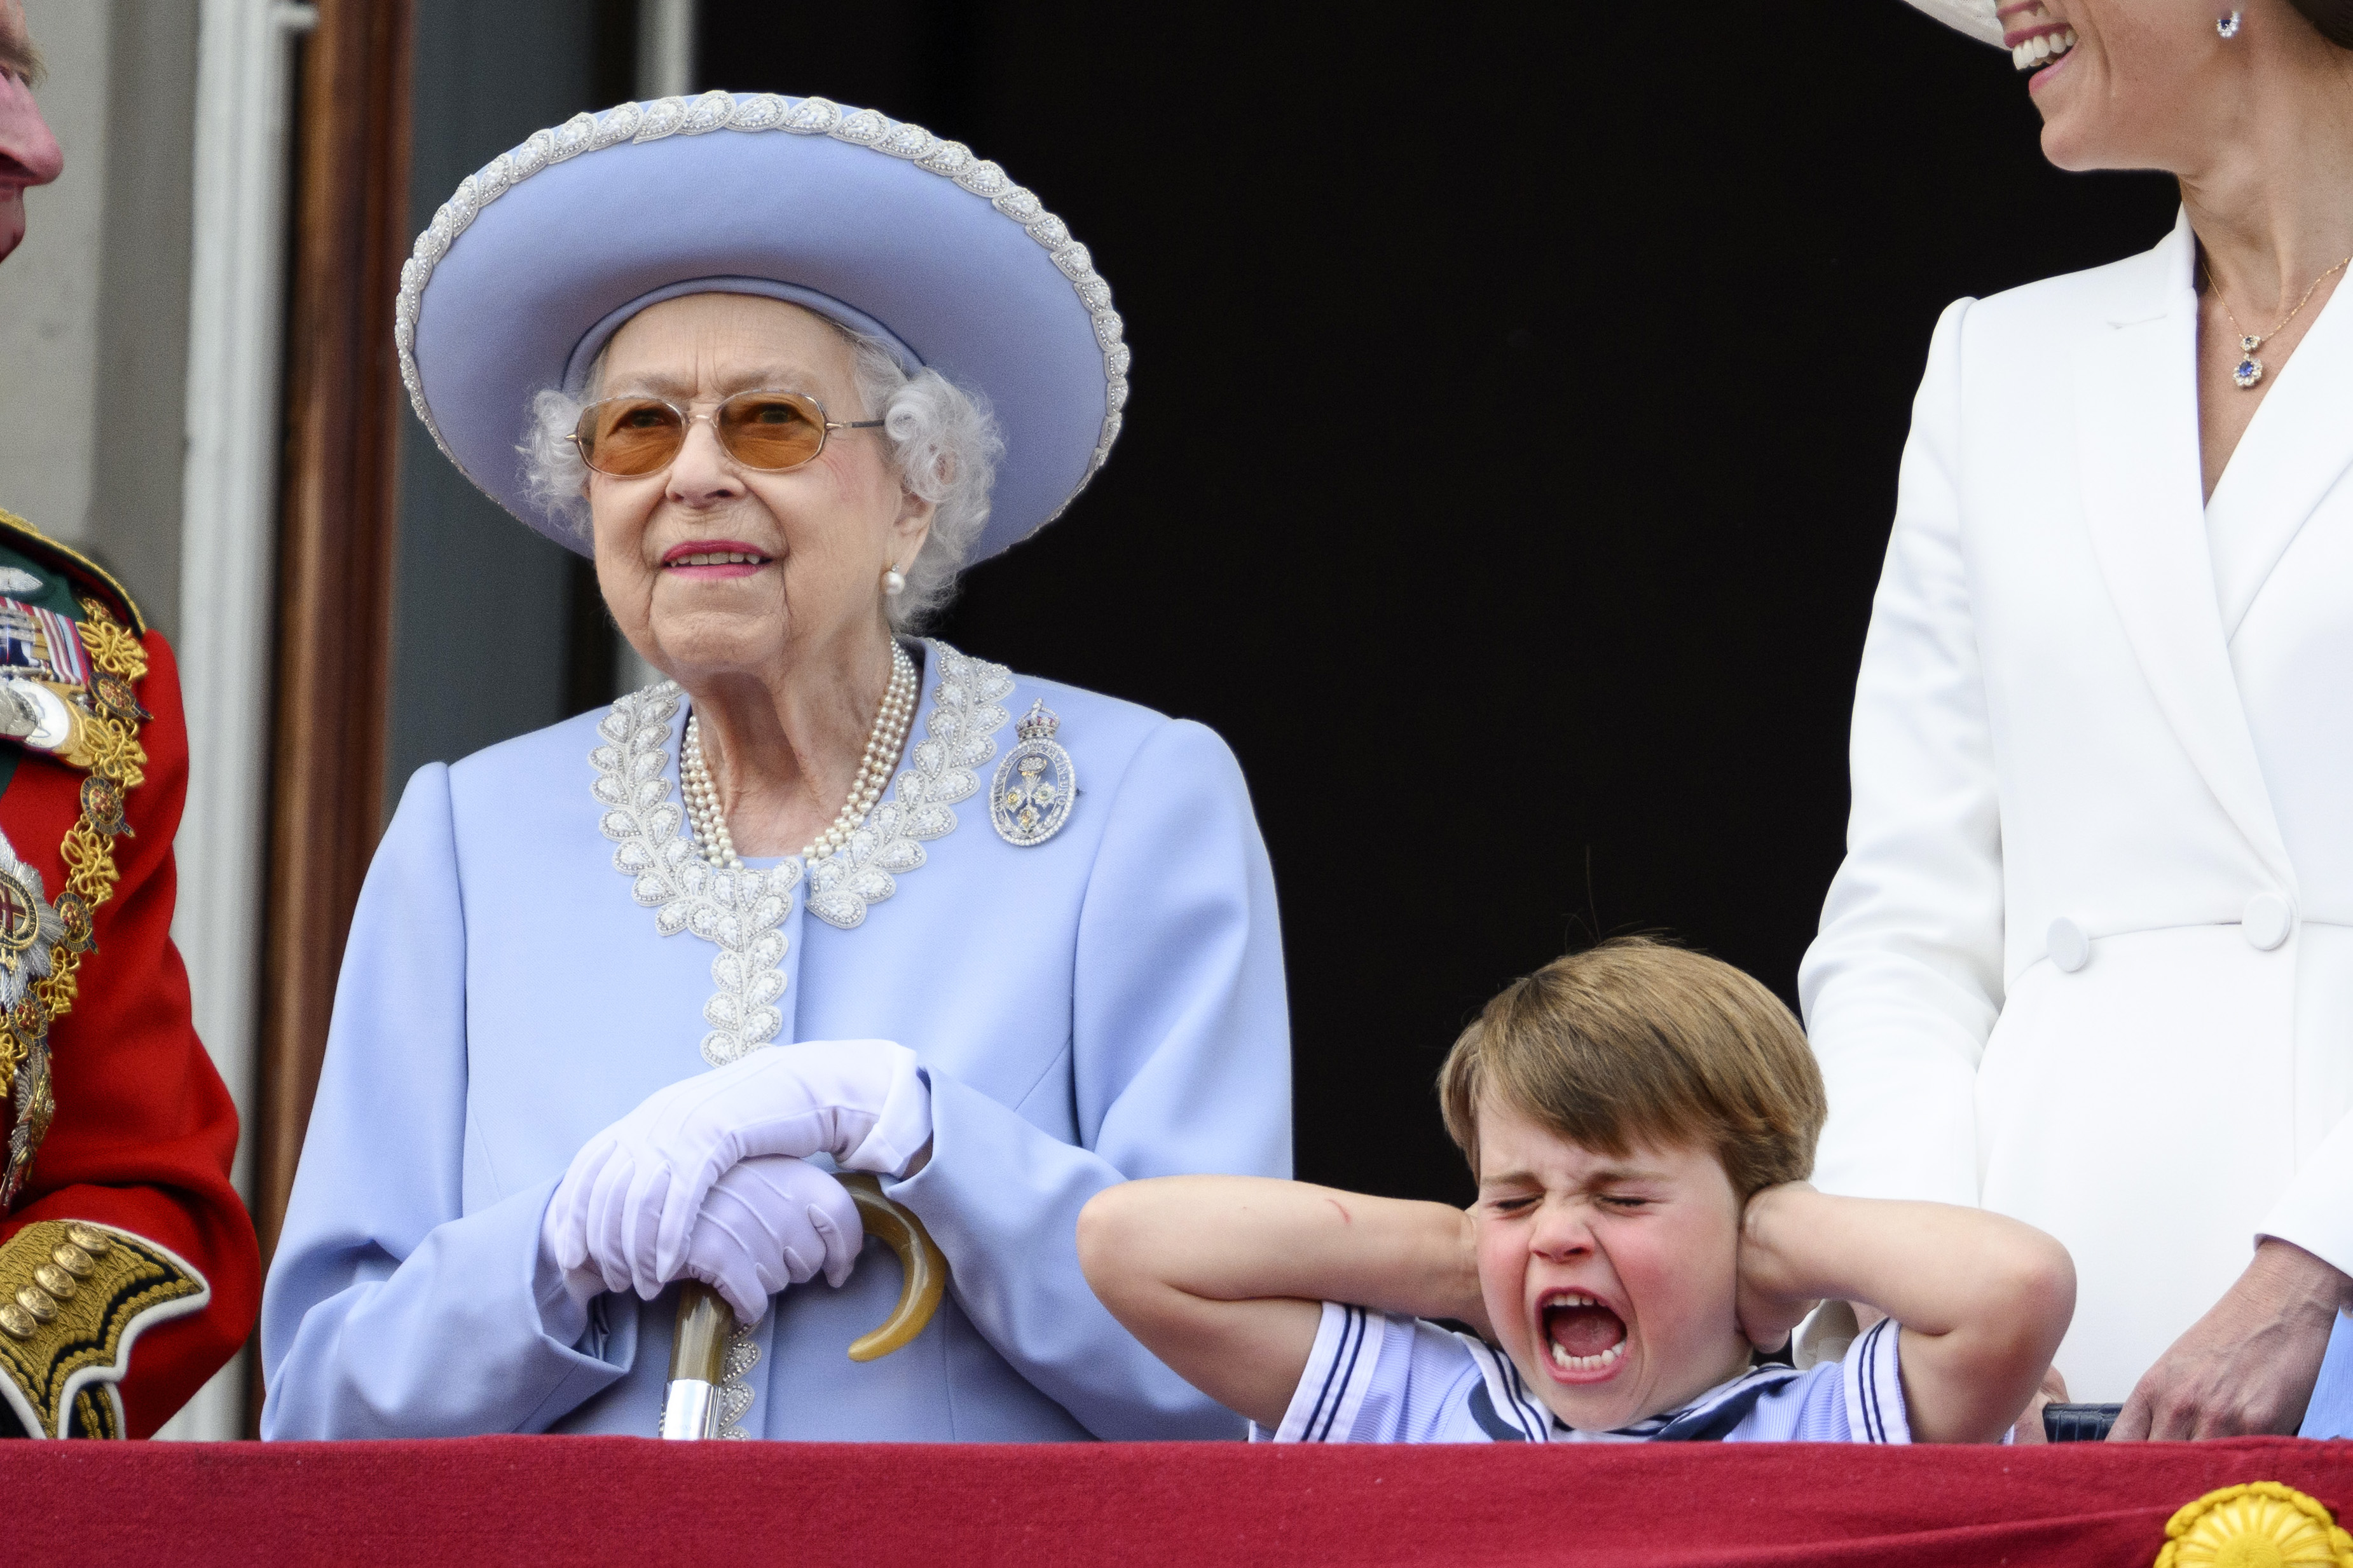 <p>Prince Louis covered his ears on the Buckingham Palace balcony alongside great-grandmother Queen Elizabeth II during her <a href="https://www.wonderwall.com/celebrity/royals/trooping-the-colour-2022-see-all-the-best-photos-of-the-cambridge-kids-duchess-kate-and-more-royals-amid-the-queens-platinum-jubilee-605764.gallery">Trooping the Colour</a> birthday celebration kicking off her <a href="https://www.wonderwall.com/celebrity/royals/platinum-jubilee-see-the-best-photos-from-4-days-of-celebrations-marking-the-queens-70-year-reign-606239.gallery">Platinum Jubilee weekend</a> on June 2, 2022.</p>